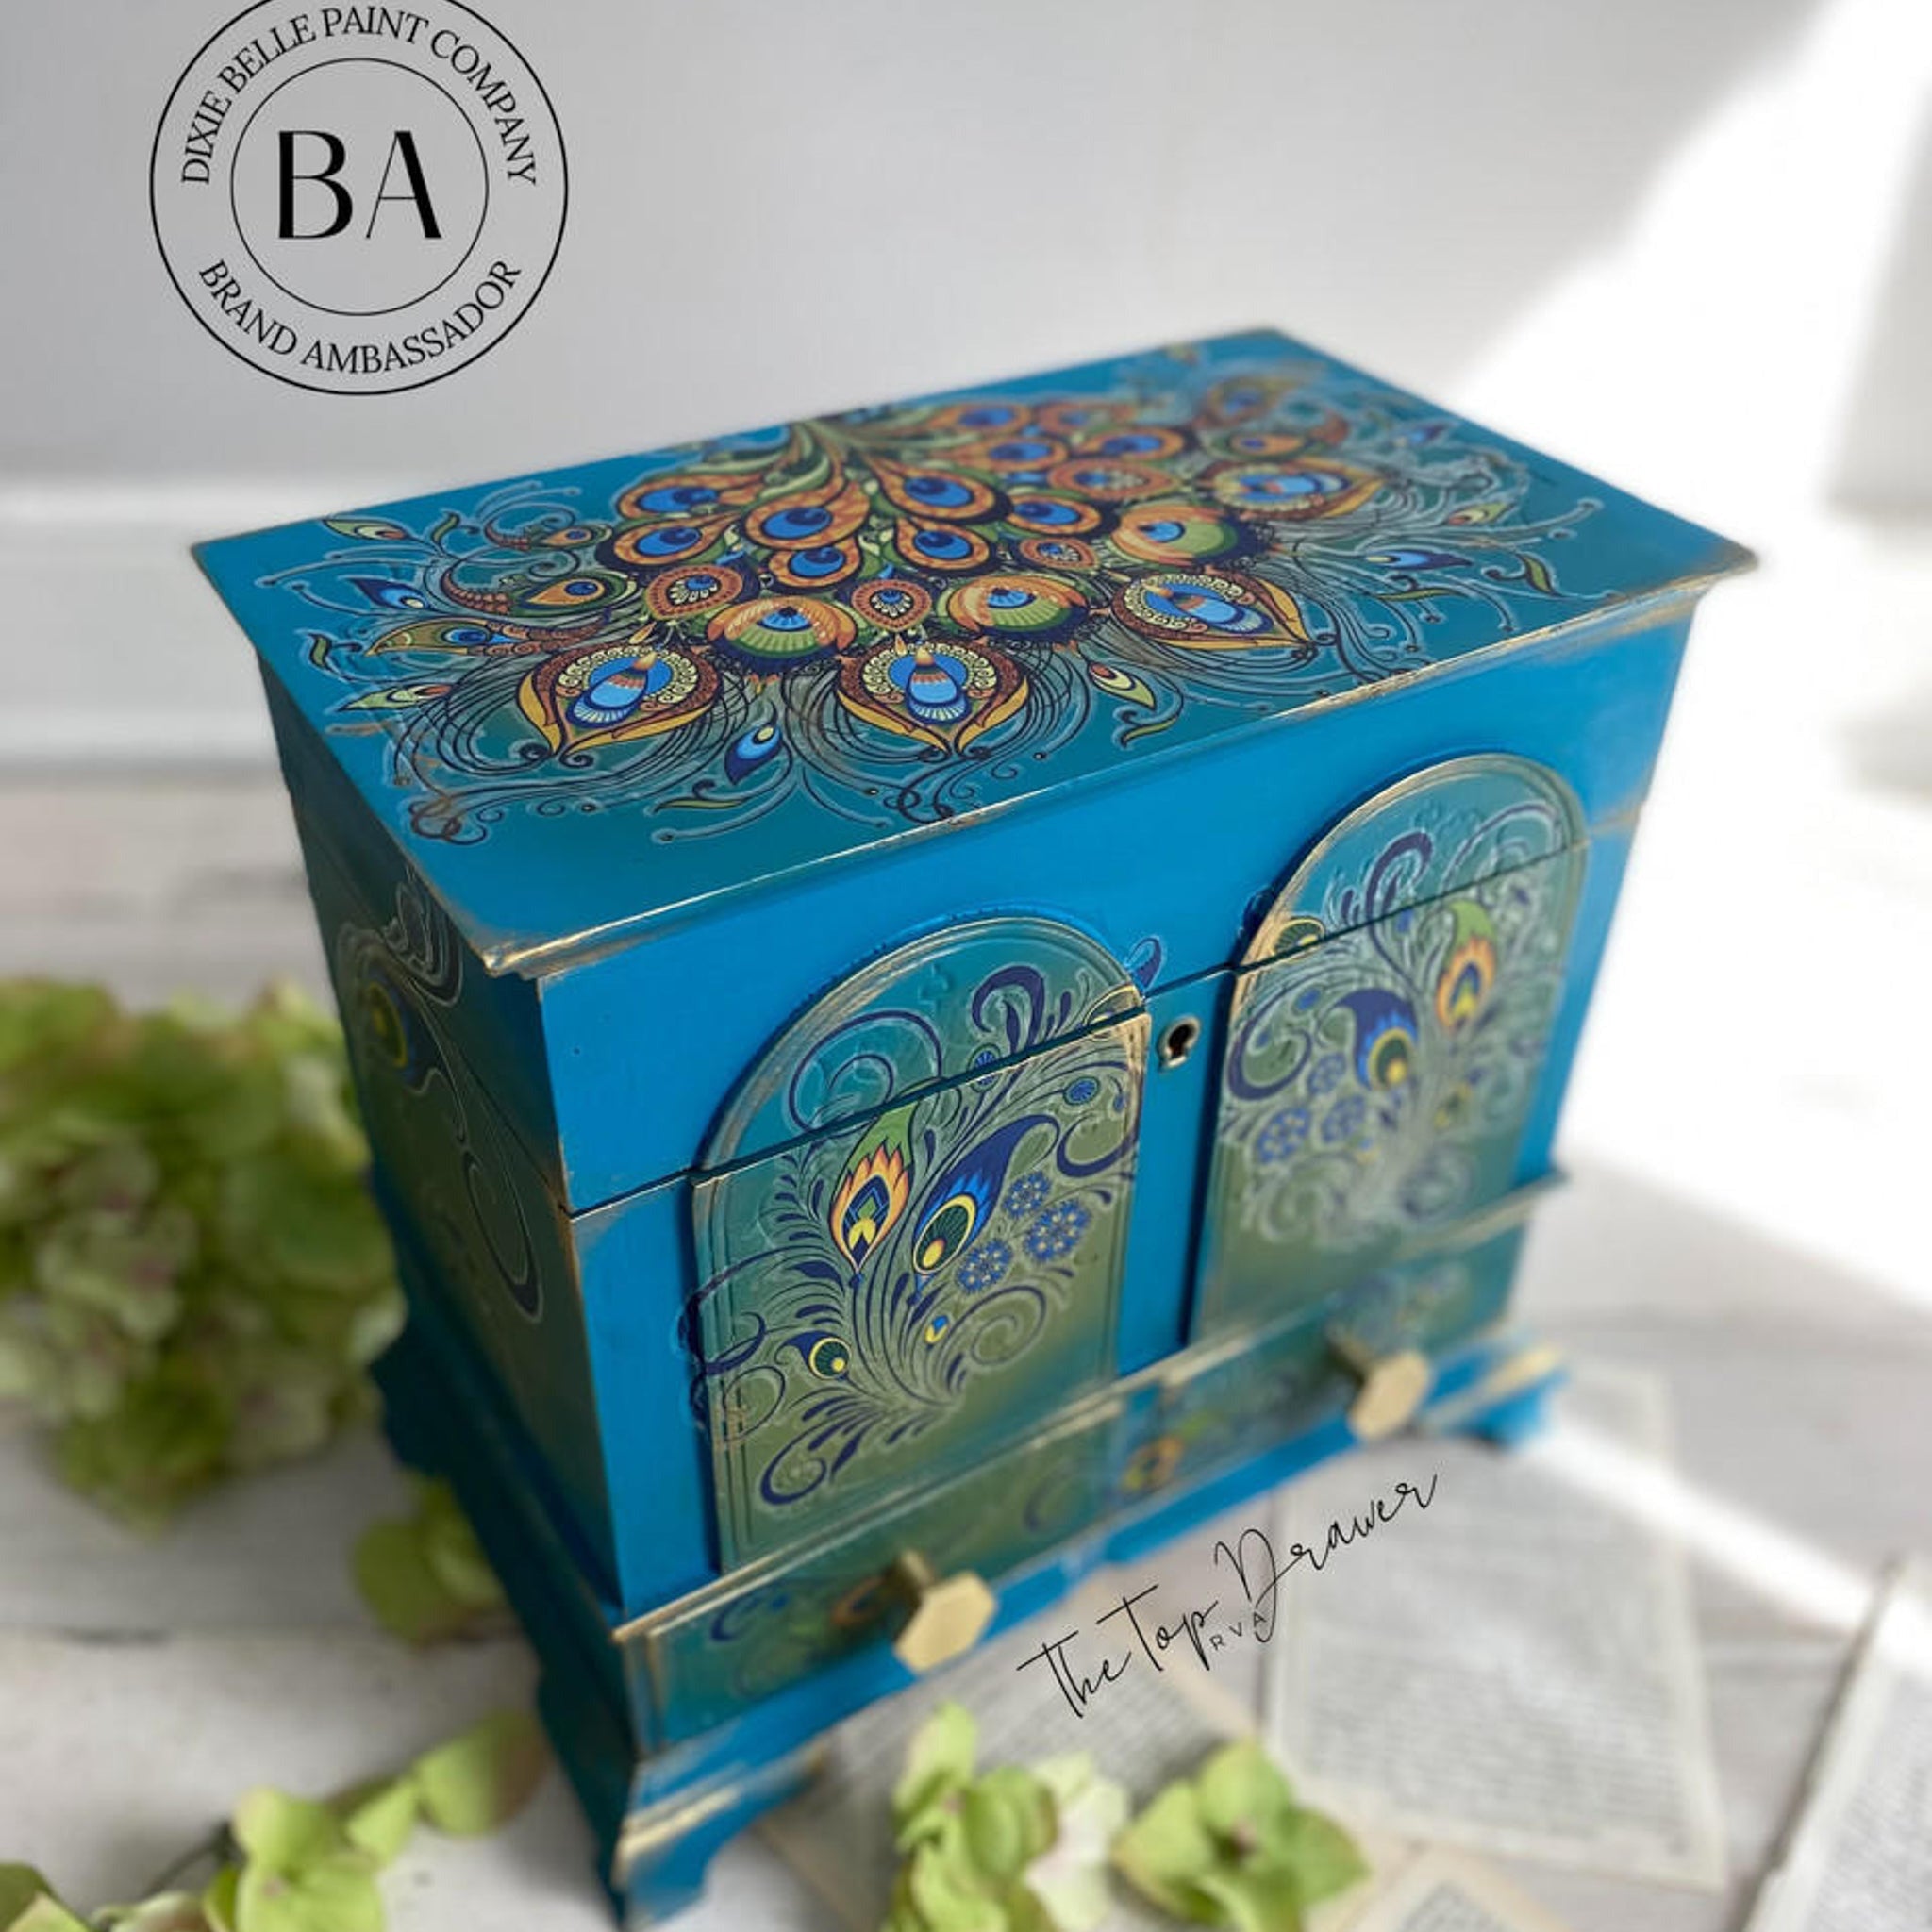 A vintage jewelry box refurbished by The Top Drawer, a Dixie Belle Paint Company Brand Ambassador, is painted a blend of blues and green and features the Retro Peacock transfer.